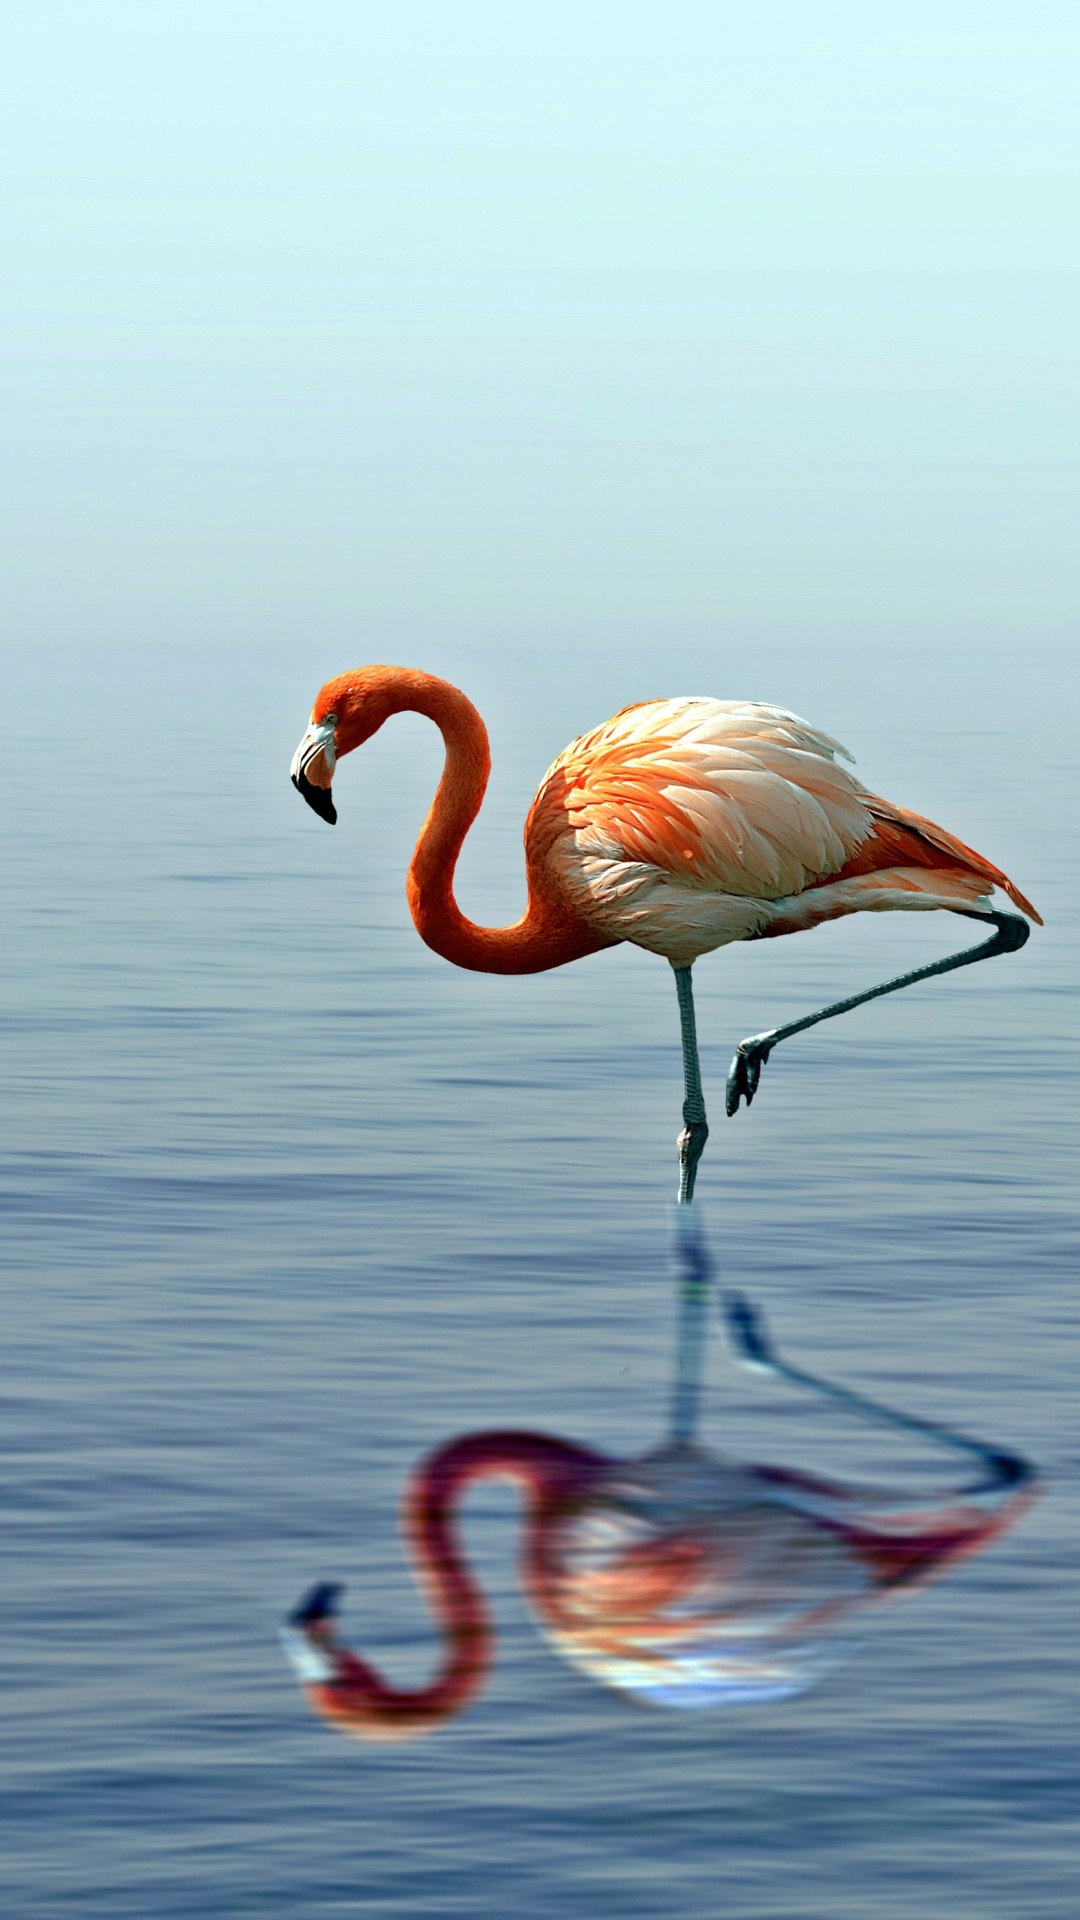 Pink Flamingo on Water During Daytime. Wallpaper in 1080x1920 Resolution